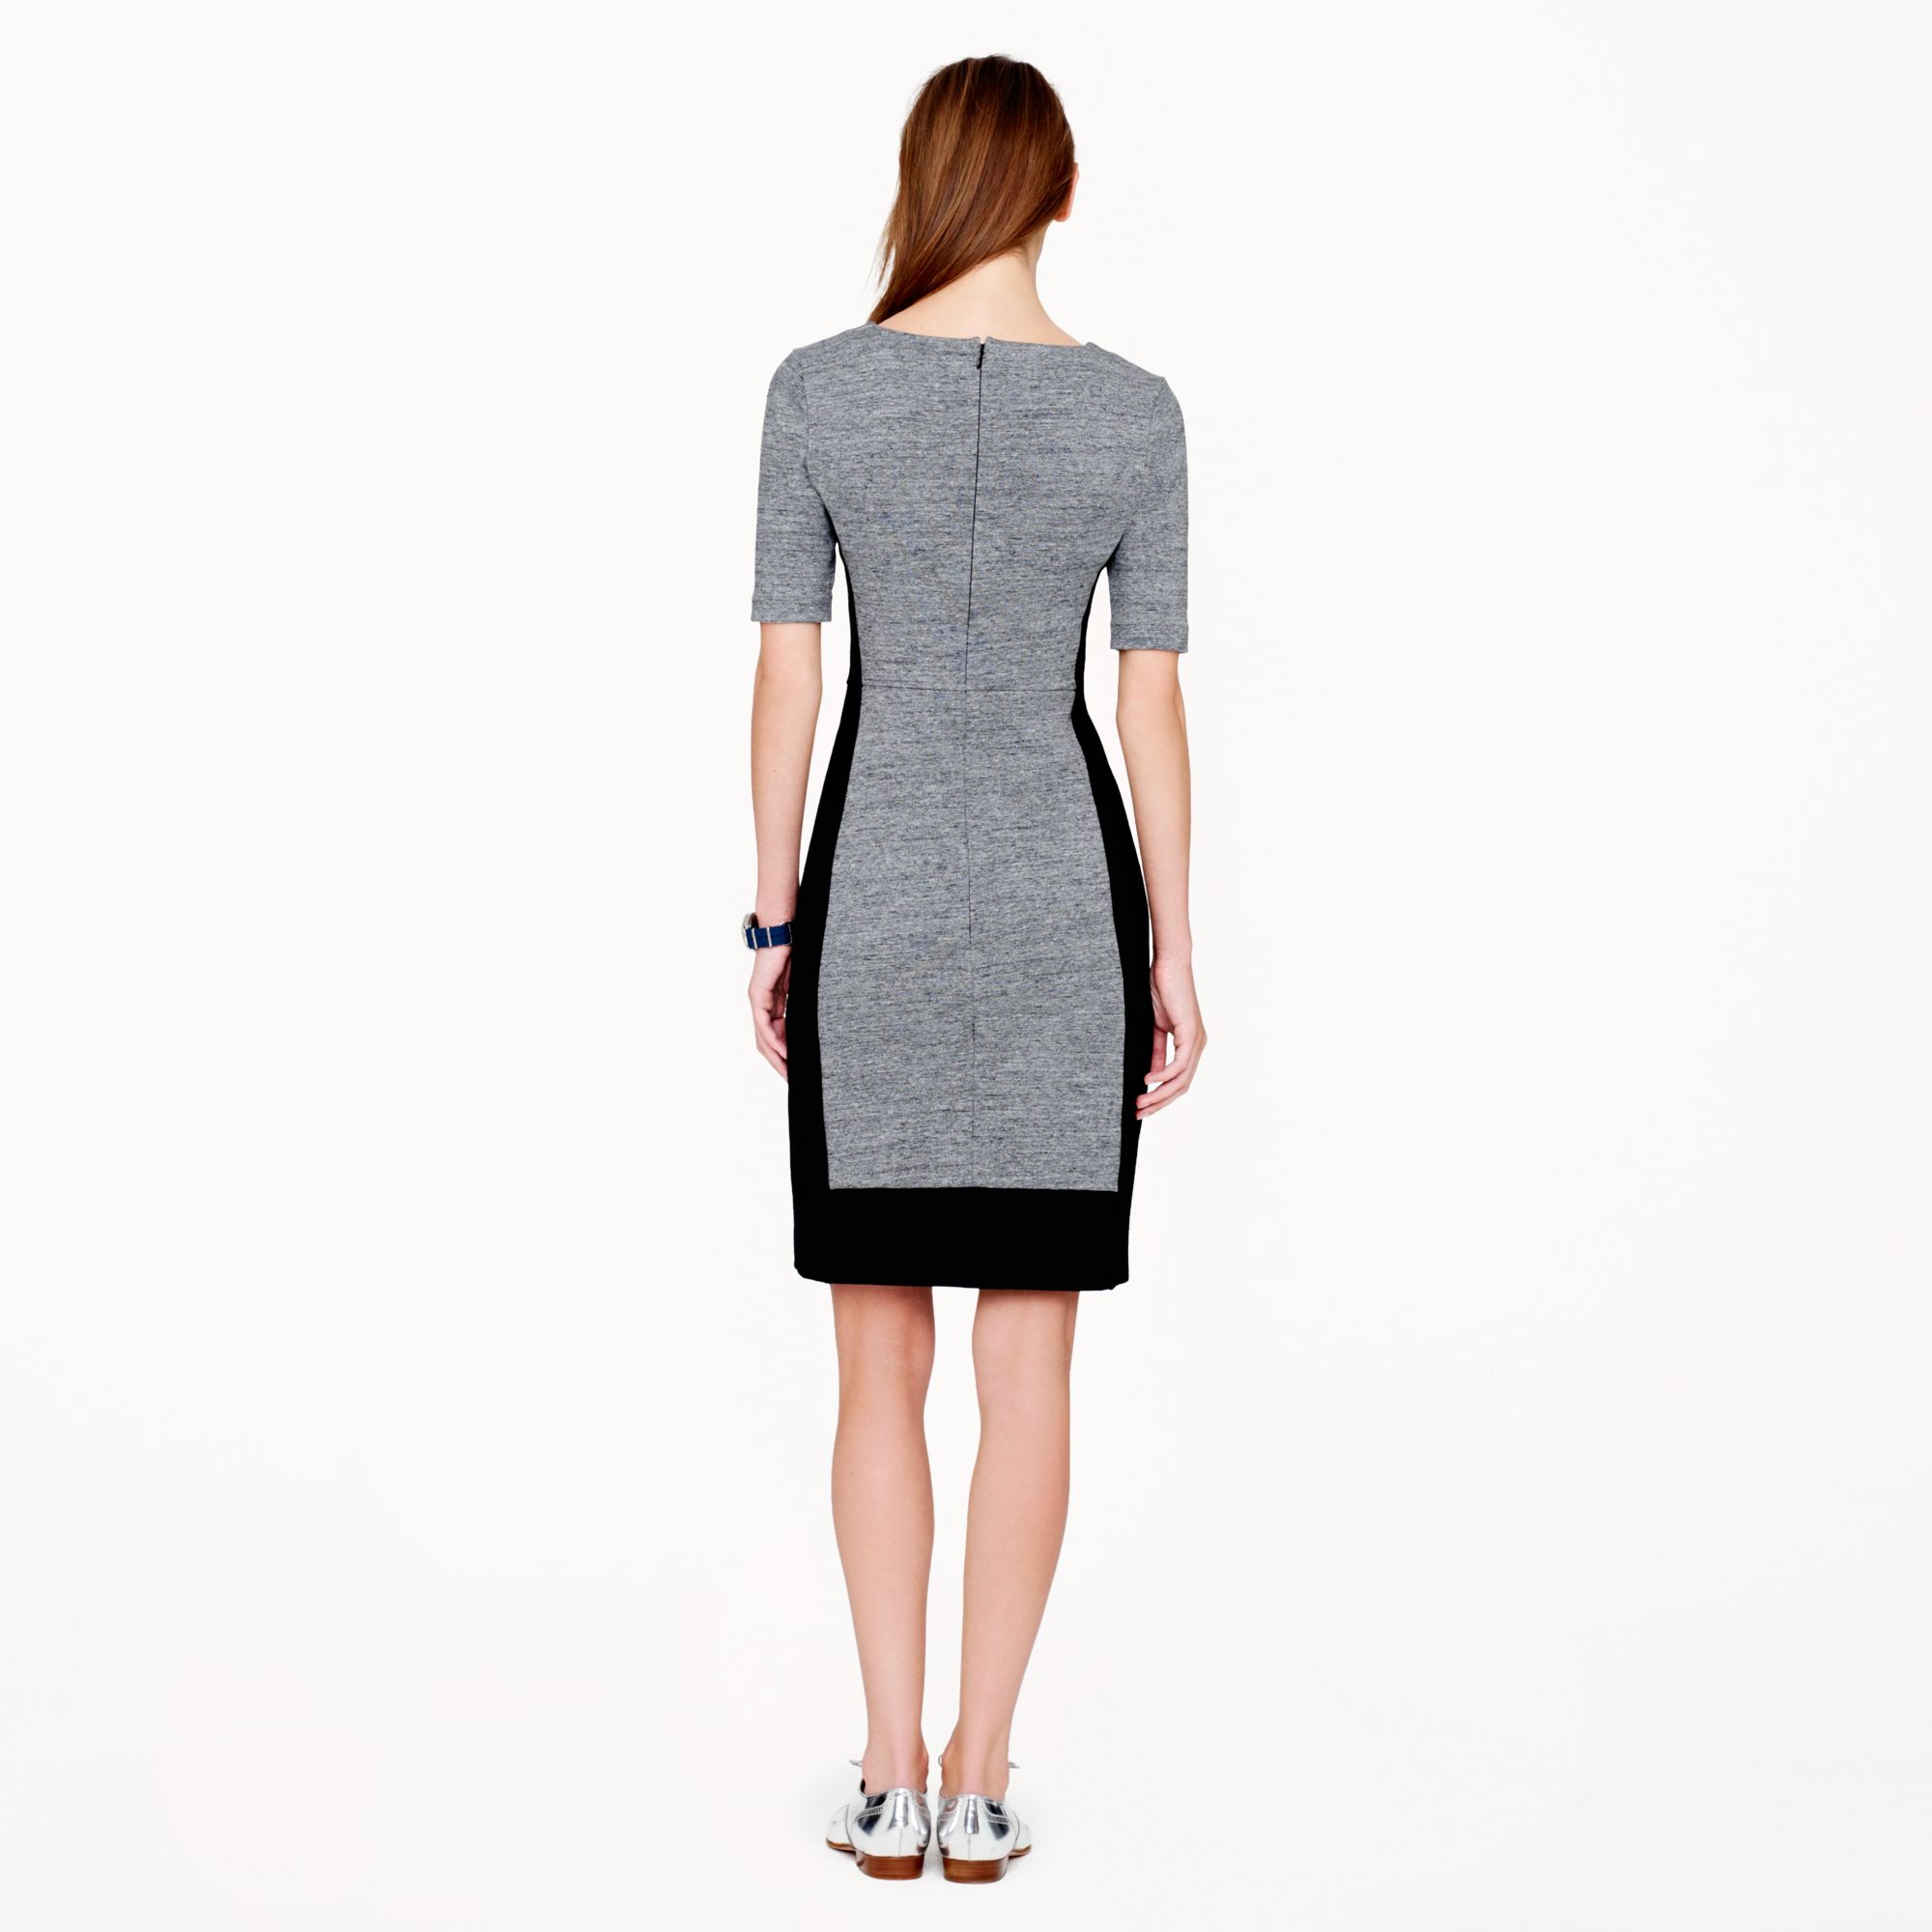 Lyst - J.Crew Paneled Stretch Dress in Colorblock in Gray